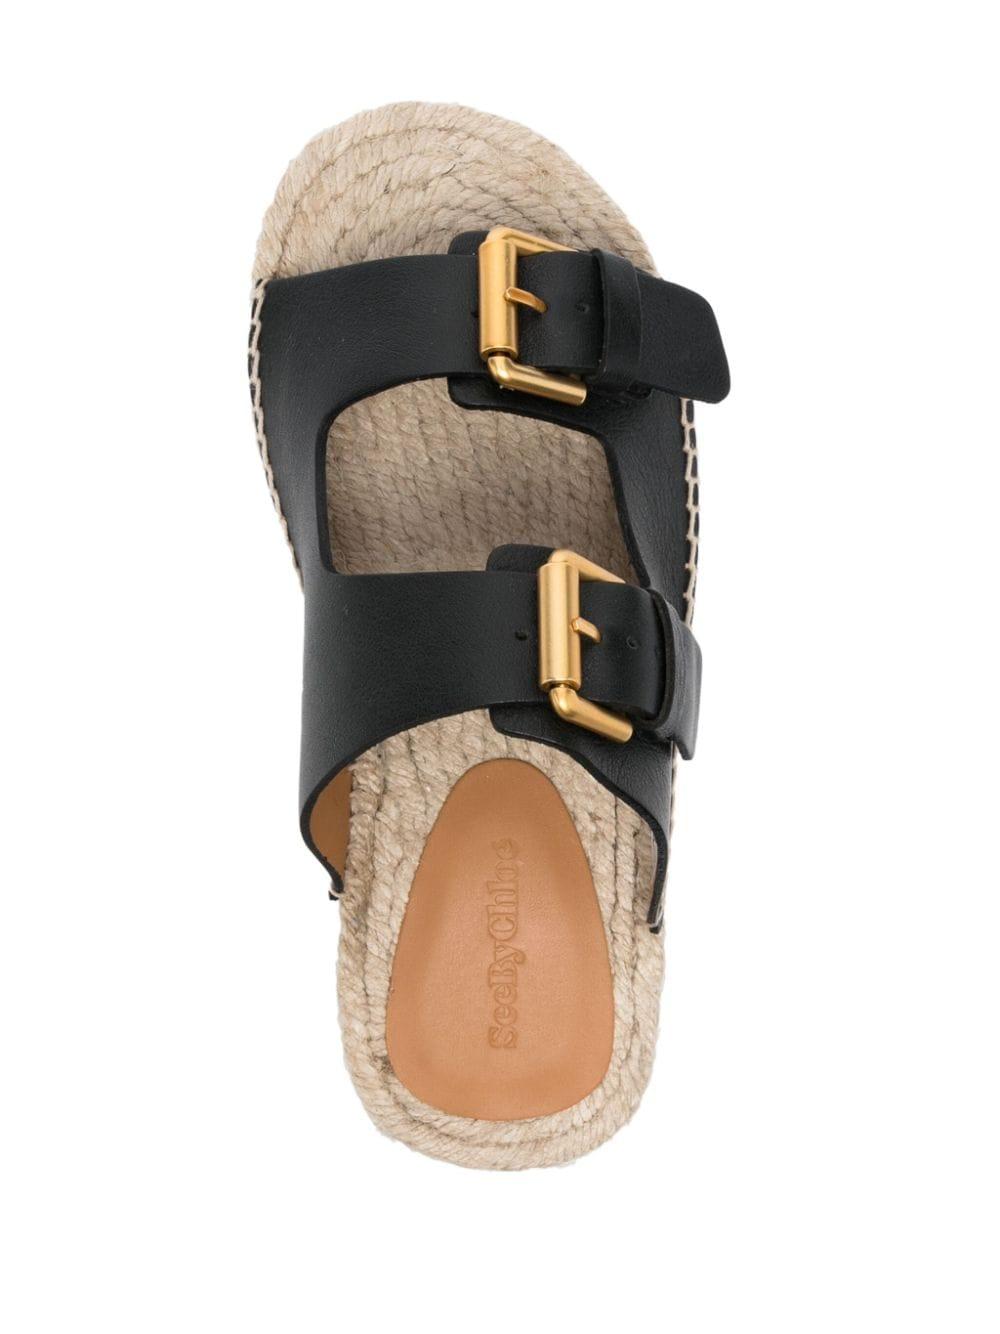 See By Chloé Leather Thong Sandals - Farfetch